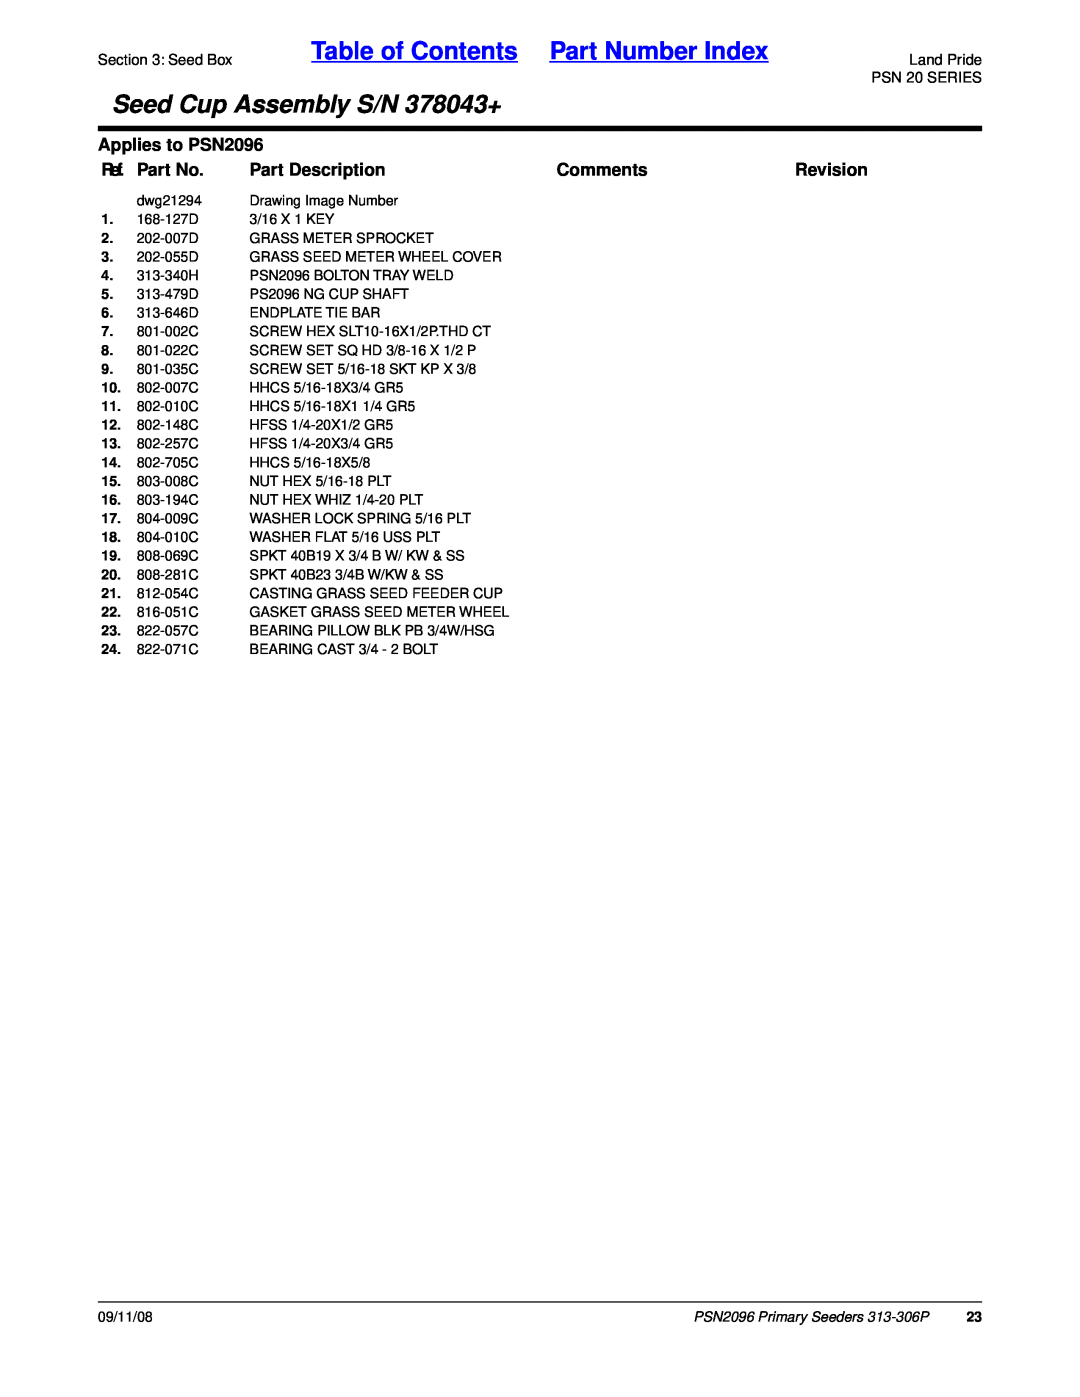 Land Pride 313-306P Table of Contents Part Number Index, Seed Cup Assembly S/N 378043+, Applies to PSN2096, Ref. Part No 